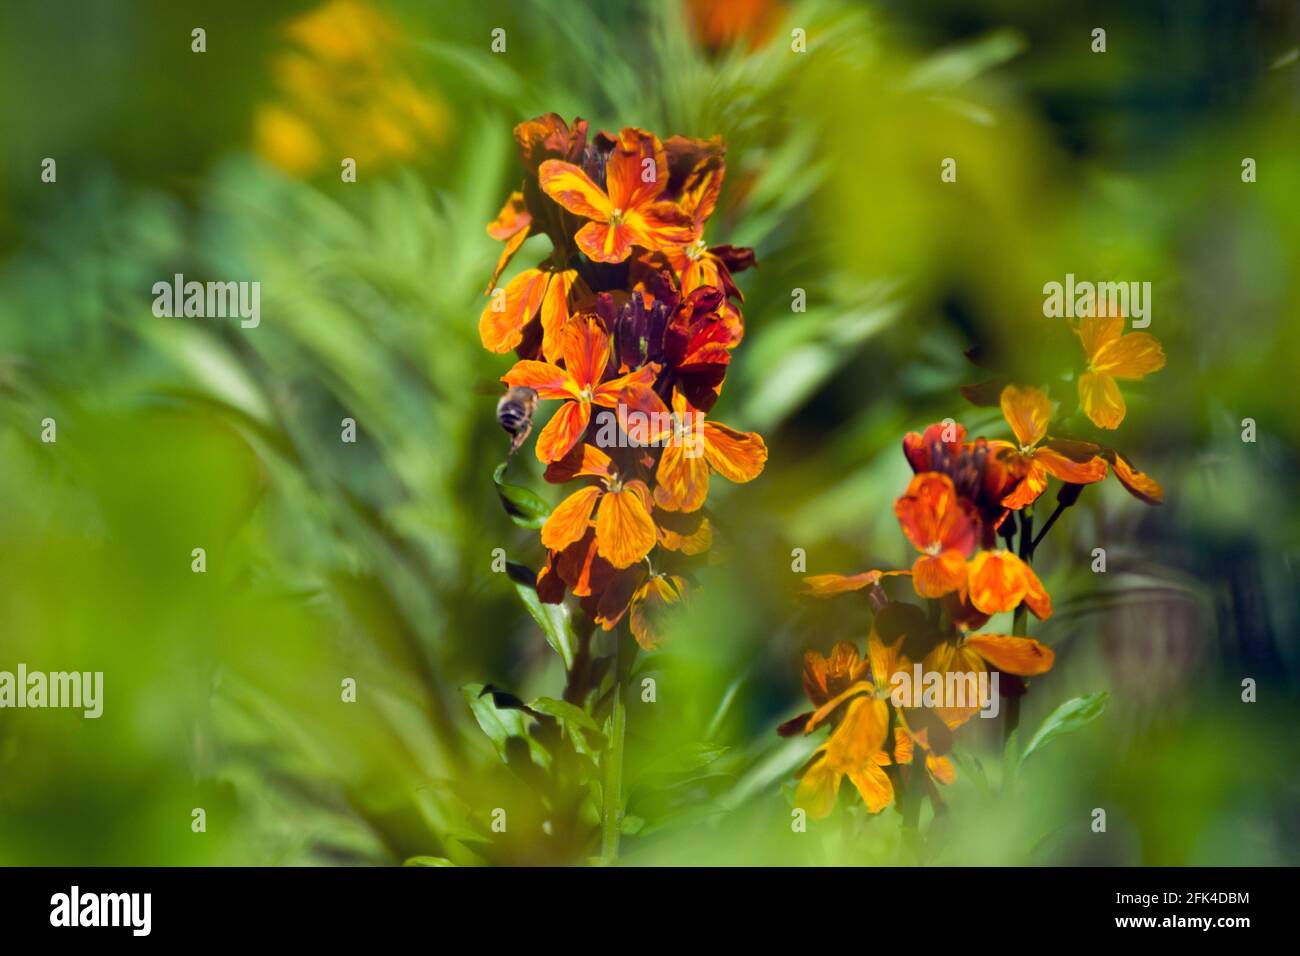 A beautiful Wallflower, a southern European plant with fragrant yellow, orange-red, dark red, brown flowers with bee buzzing in it. Bokeh background. Stock Photo